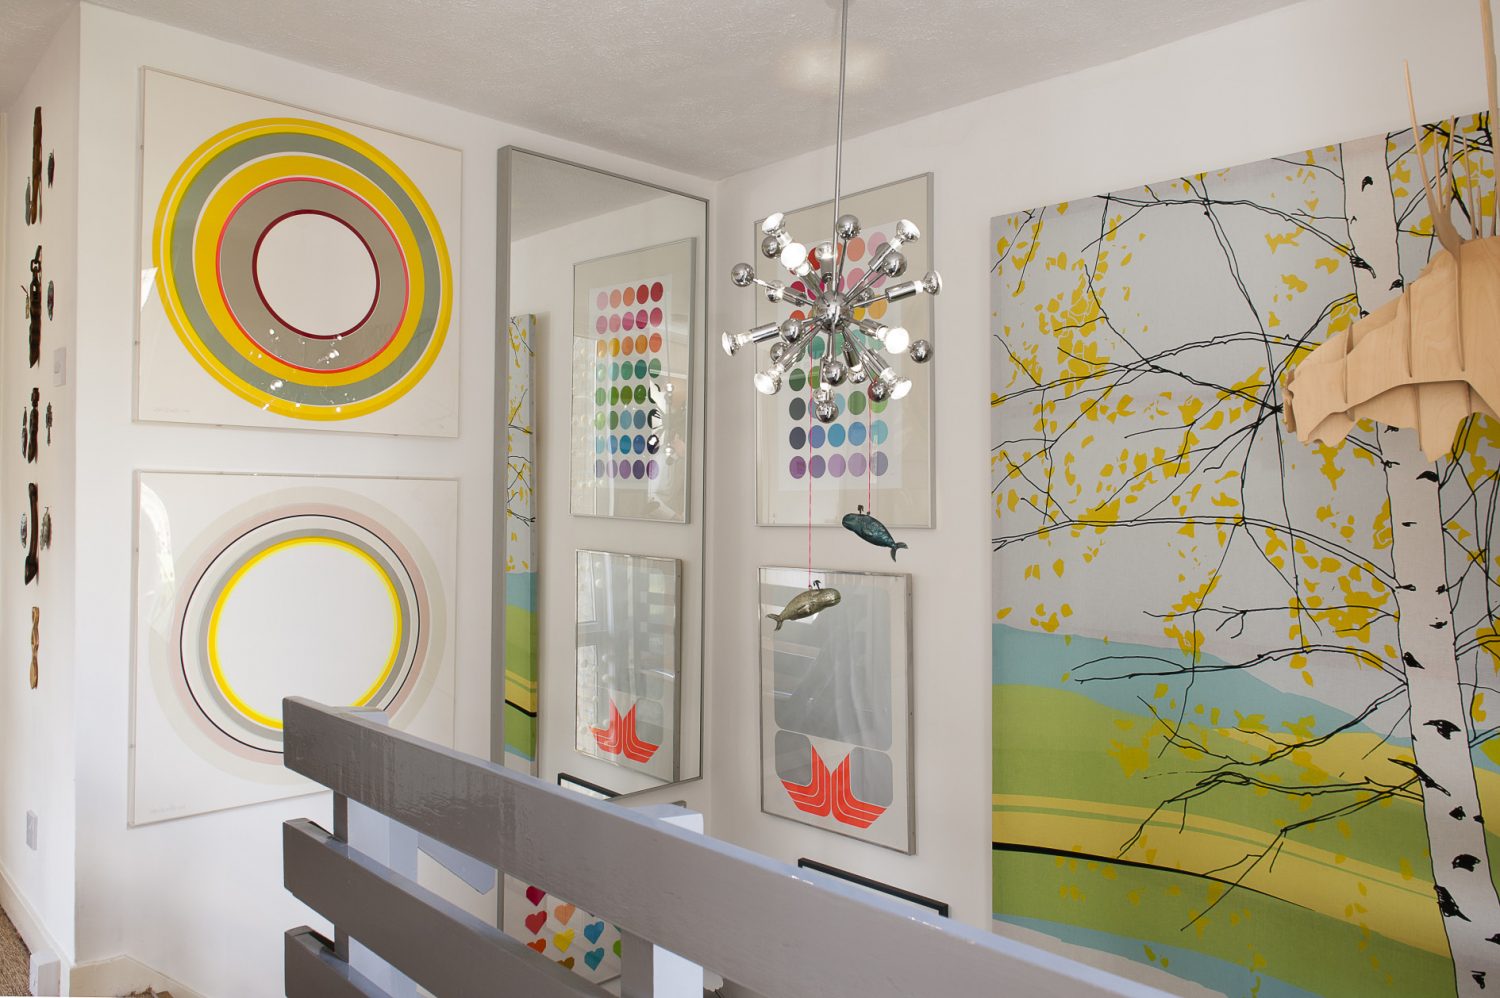 Two sizable canvases depicting large neon circles by Sam’s favourite artist, Sophie Smallhorn, hang to the left of the landing